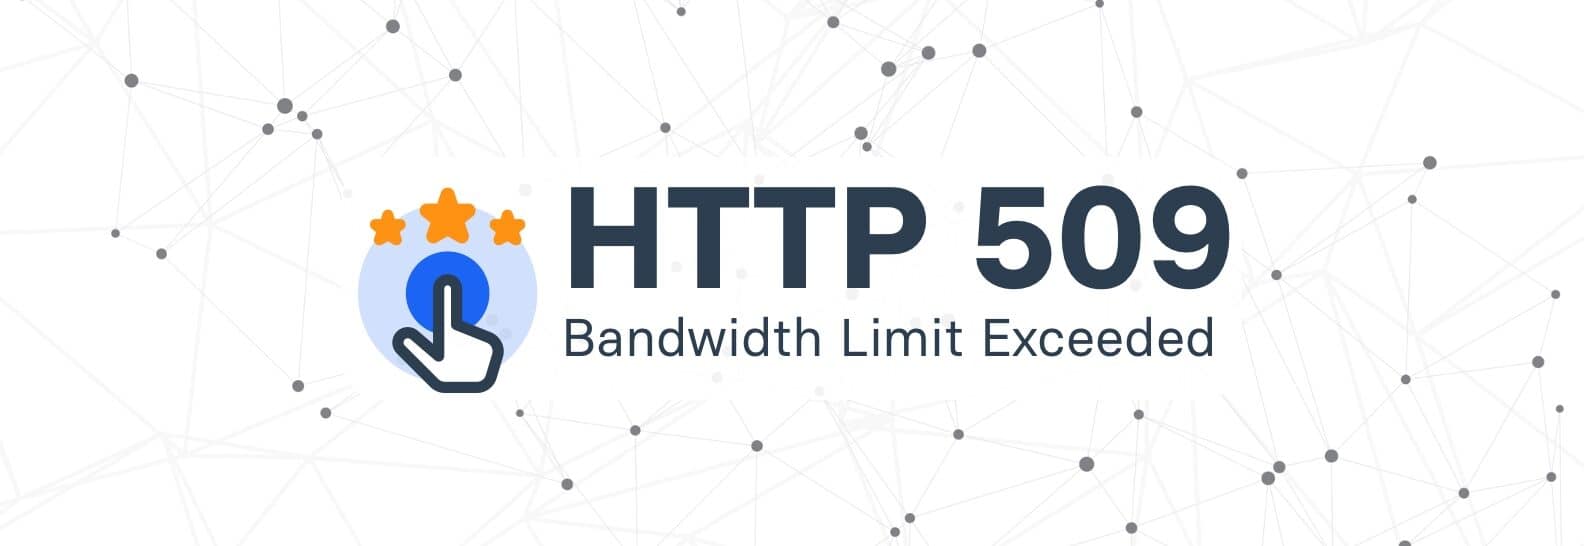 HTTP 509 (Bandwidth Limit Exceeded)